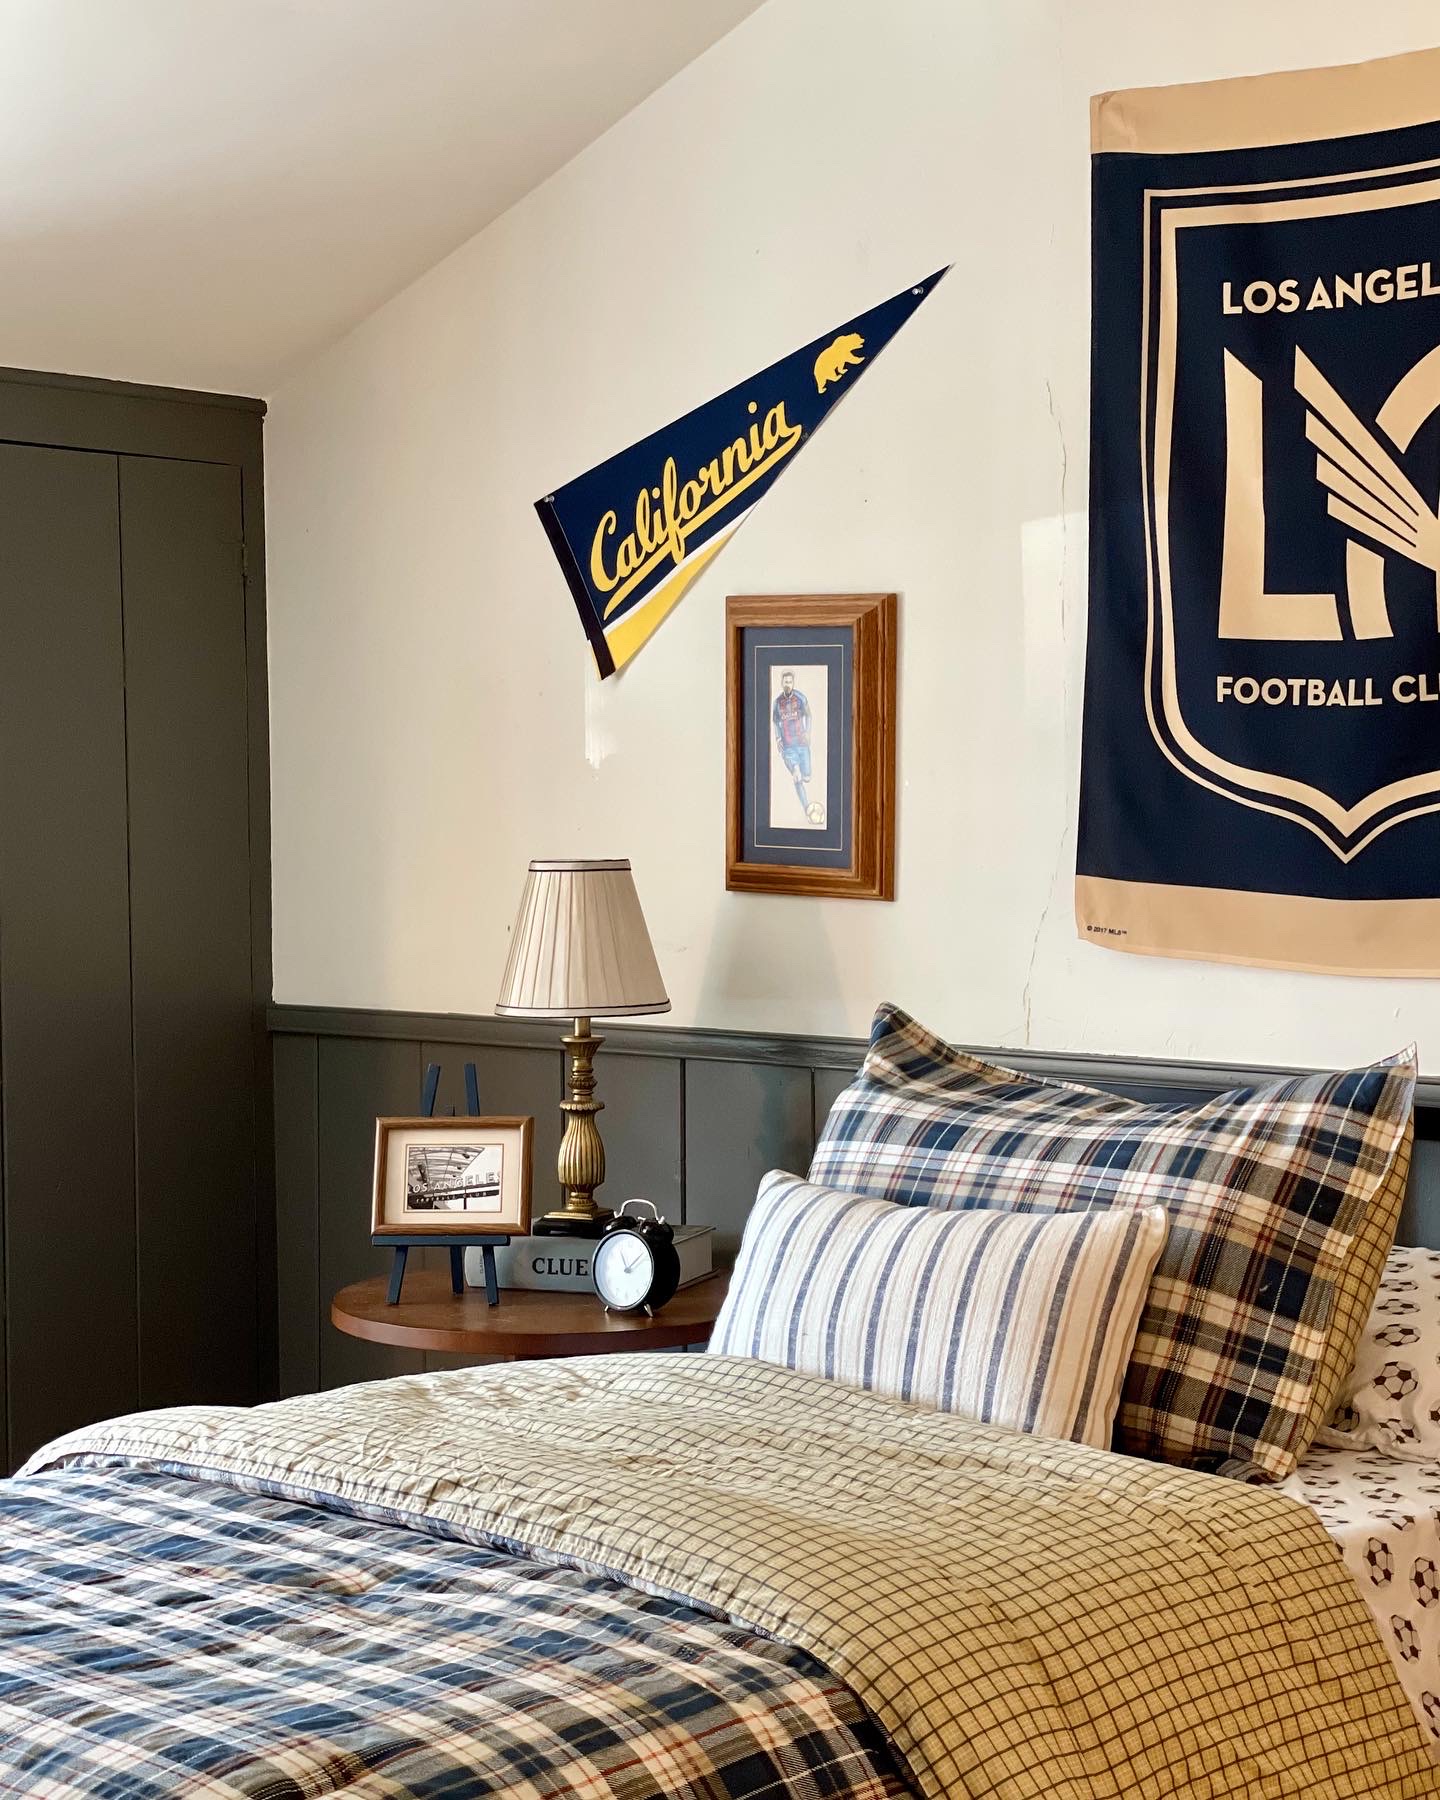 Boys soccer room, kids soccer themed room, kendall charcoal benjamin moore, dark gray paint, black paint, shiplap walls, dunn edwards swiss coffee paint, built in closets, window in middle of closet, wooden woven shades, interior dormer window, vintage rug, laminate floors, plaid bedding, LAFC themed room, modern traditional kids room, shiplap wainscotting, camp themed room